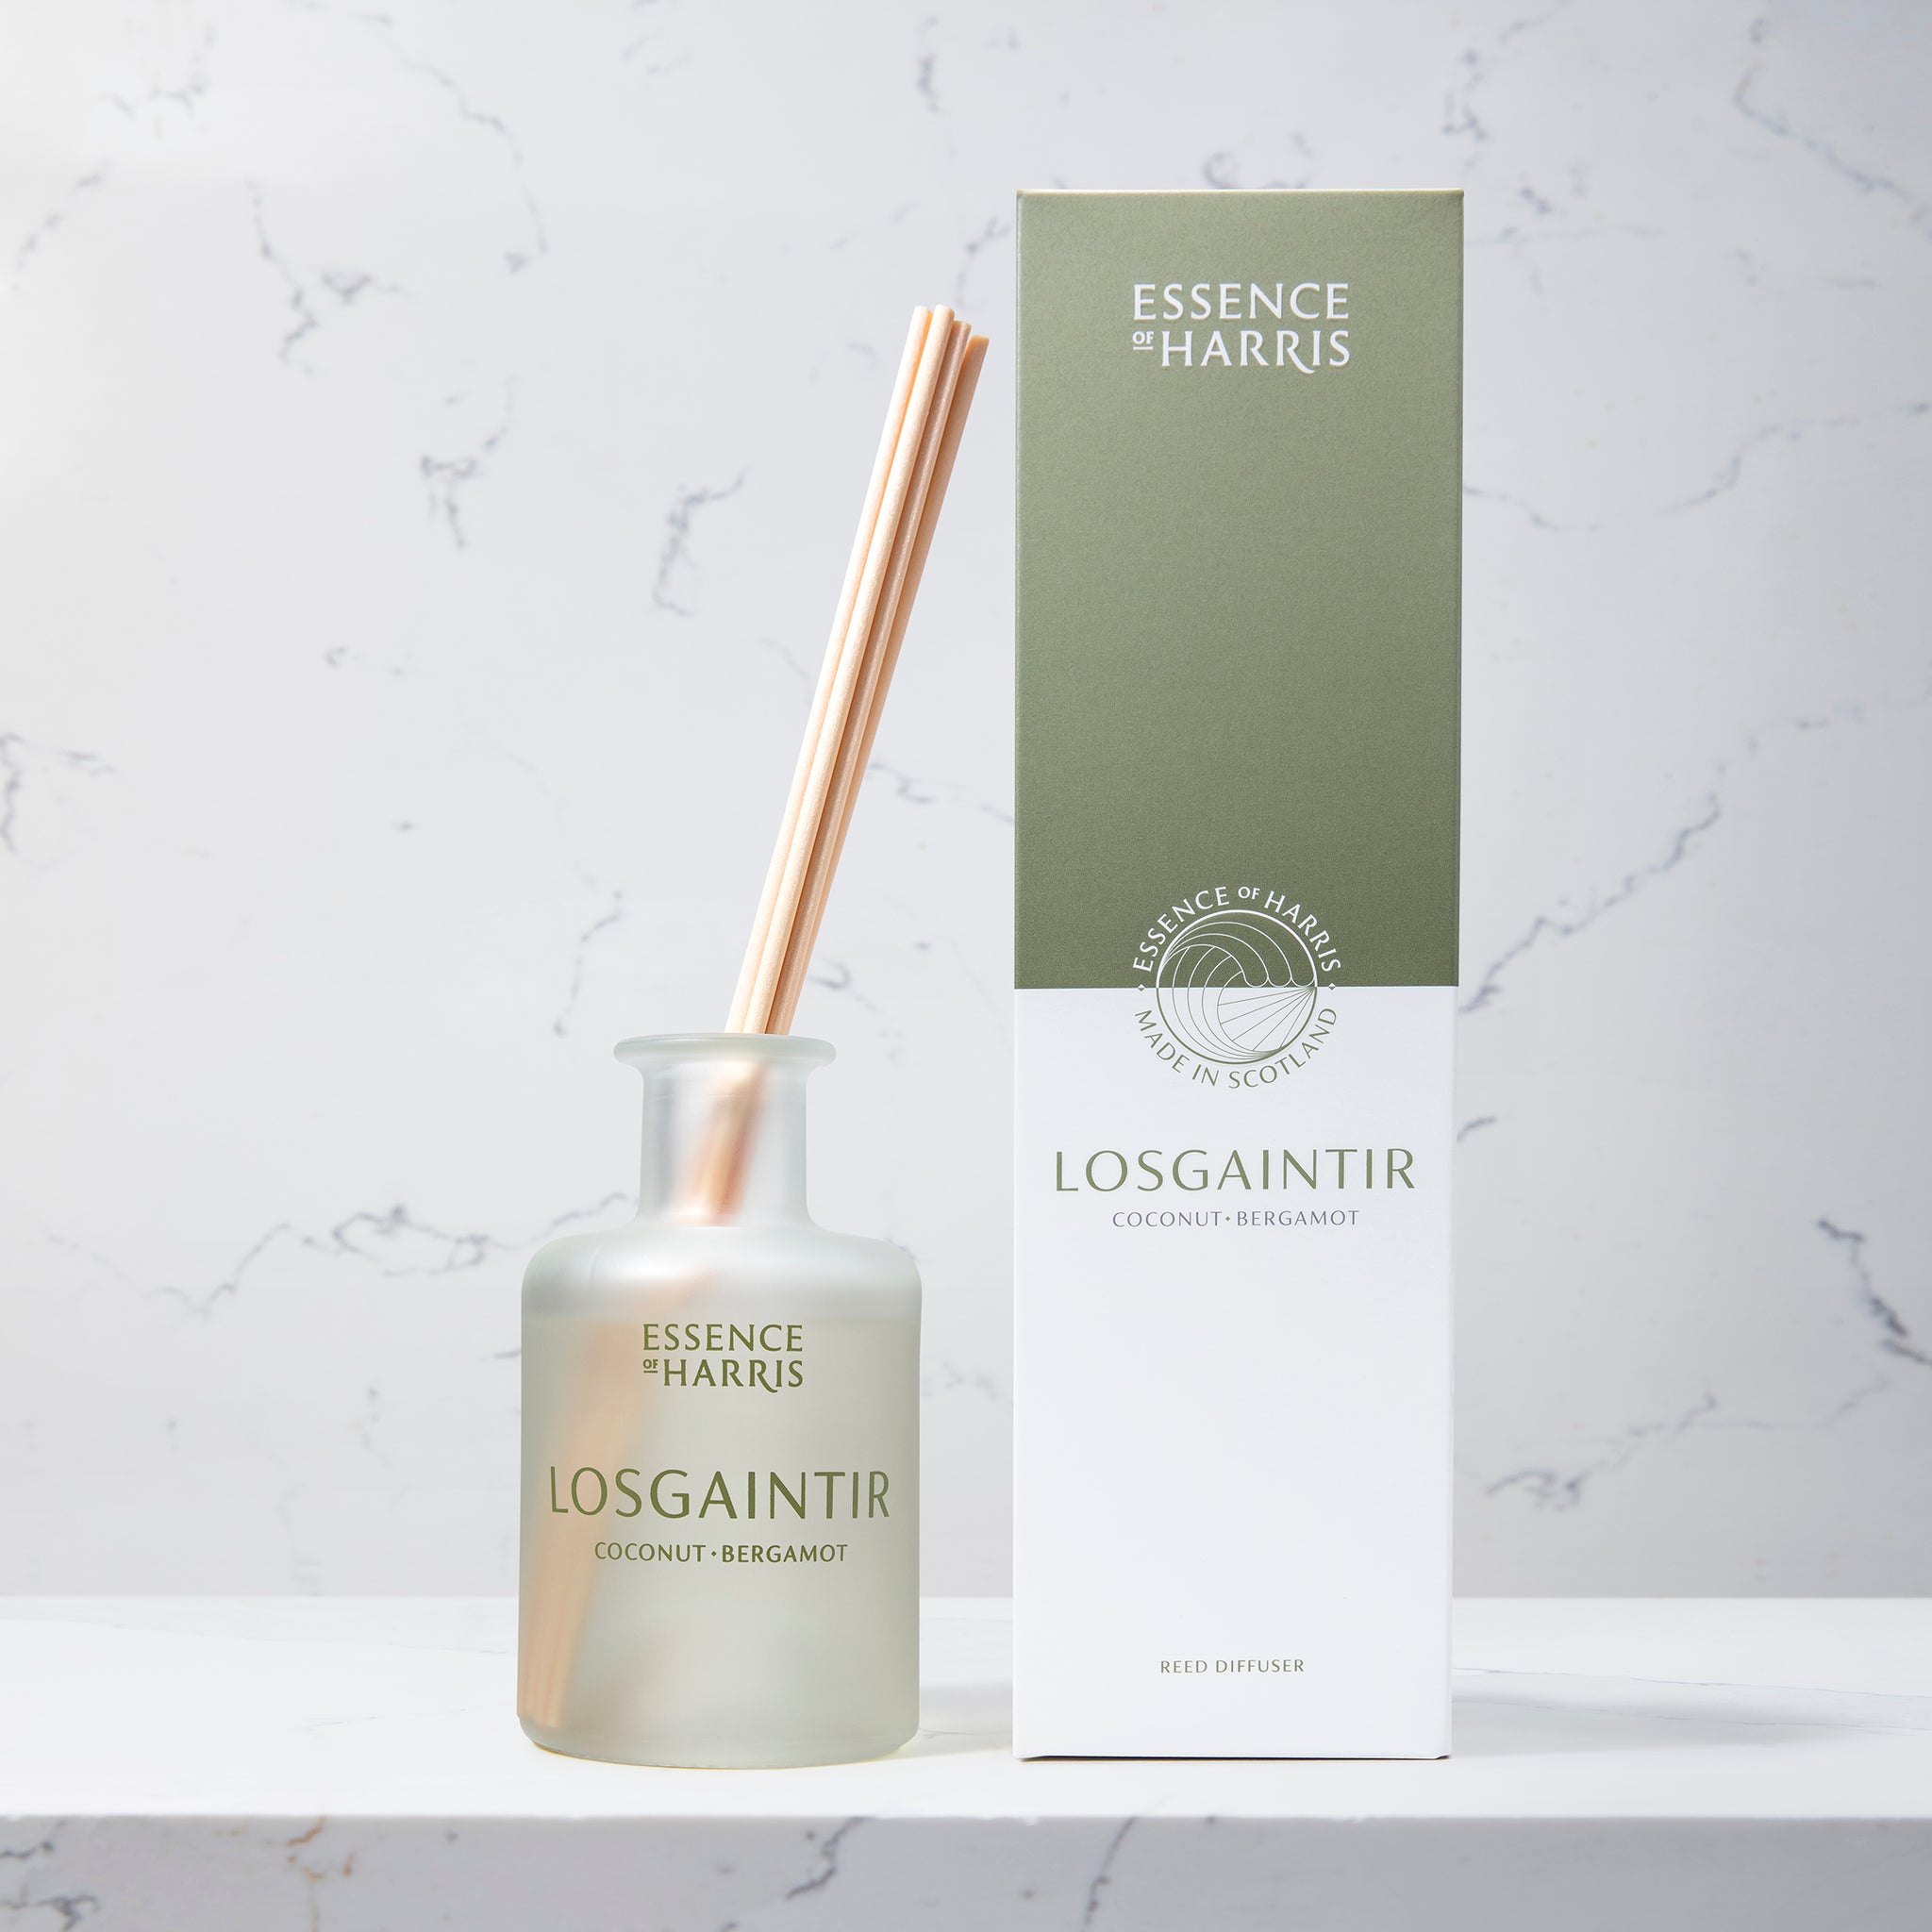 Losgaintir, coconut and bergamot frosted glass reed diffuser on marble background next to green and white box